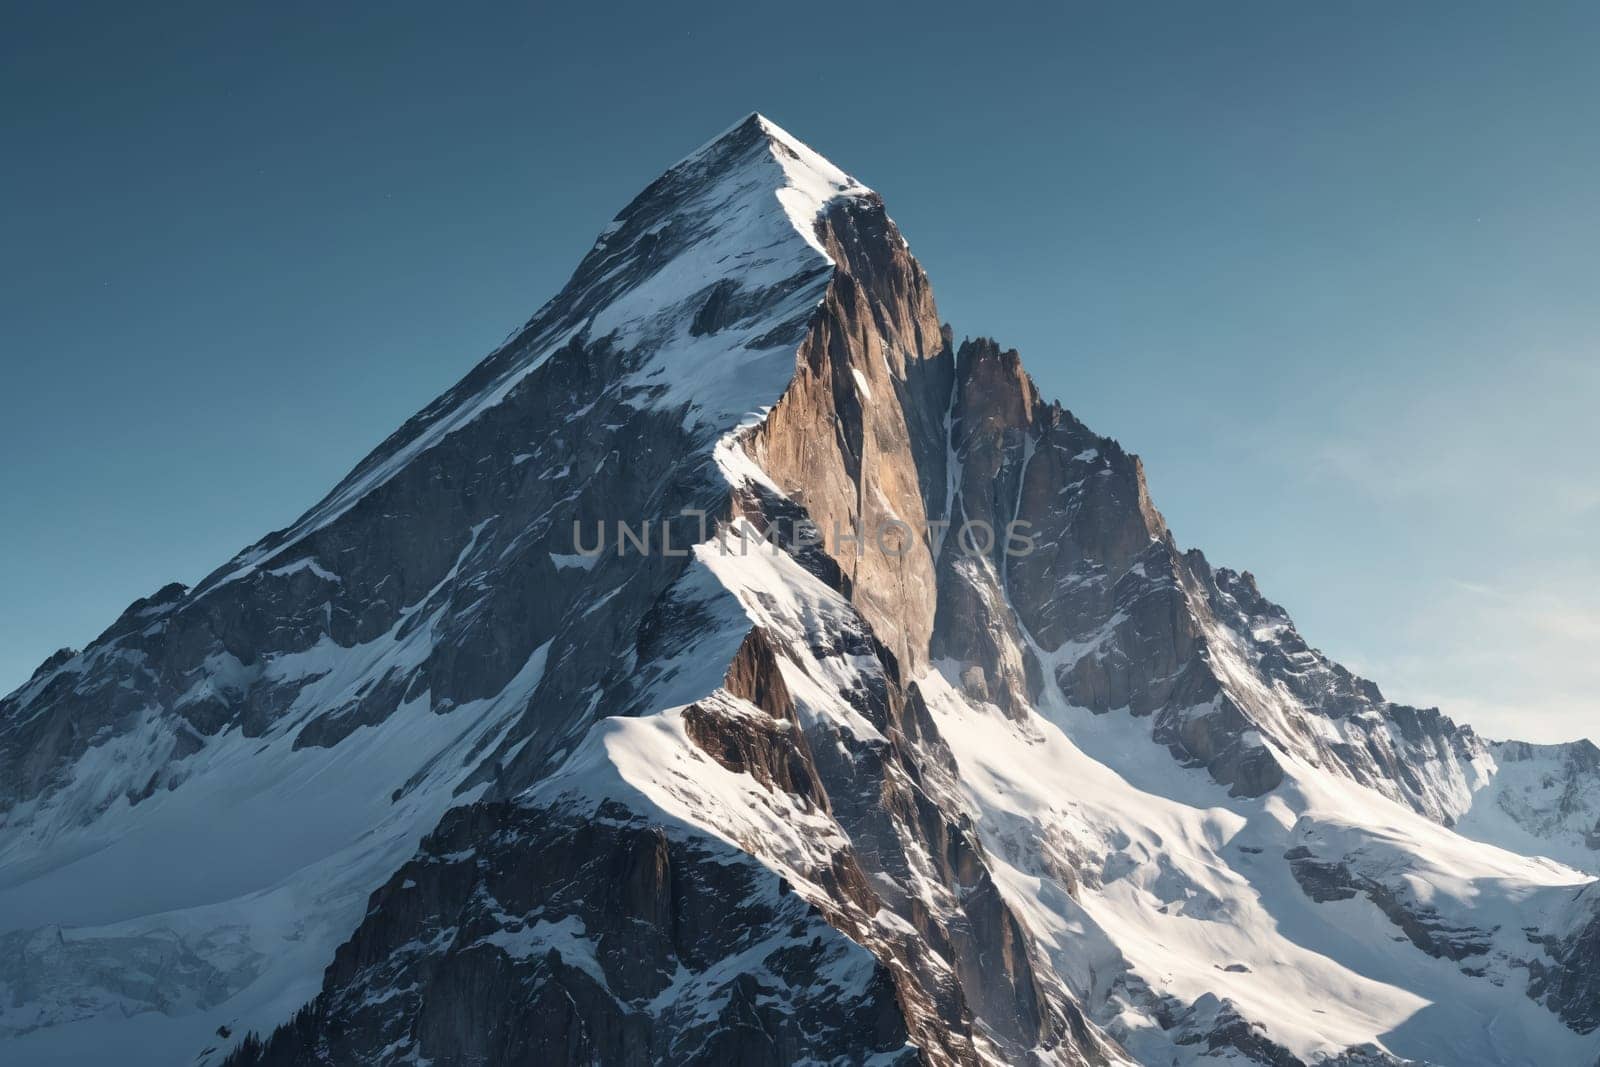 The beauty of contrast captured in the rugged rocks and delicate snow of a towering mountain amidst the tranquil blue sky.